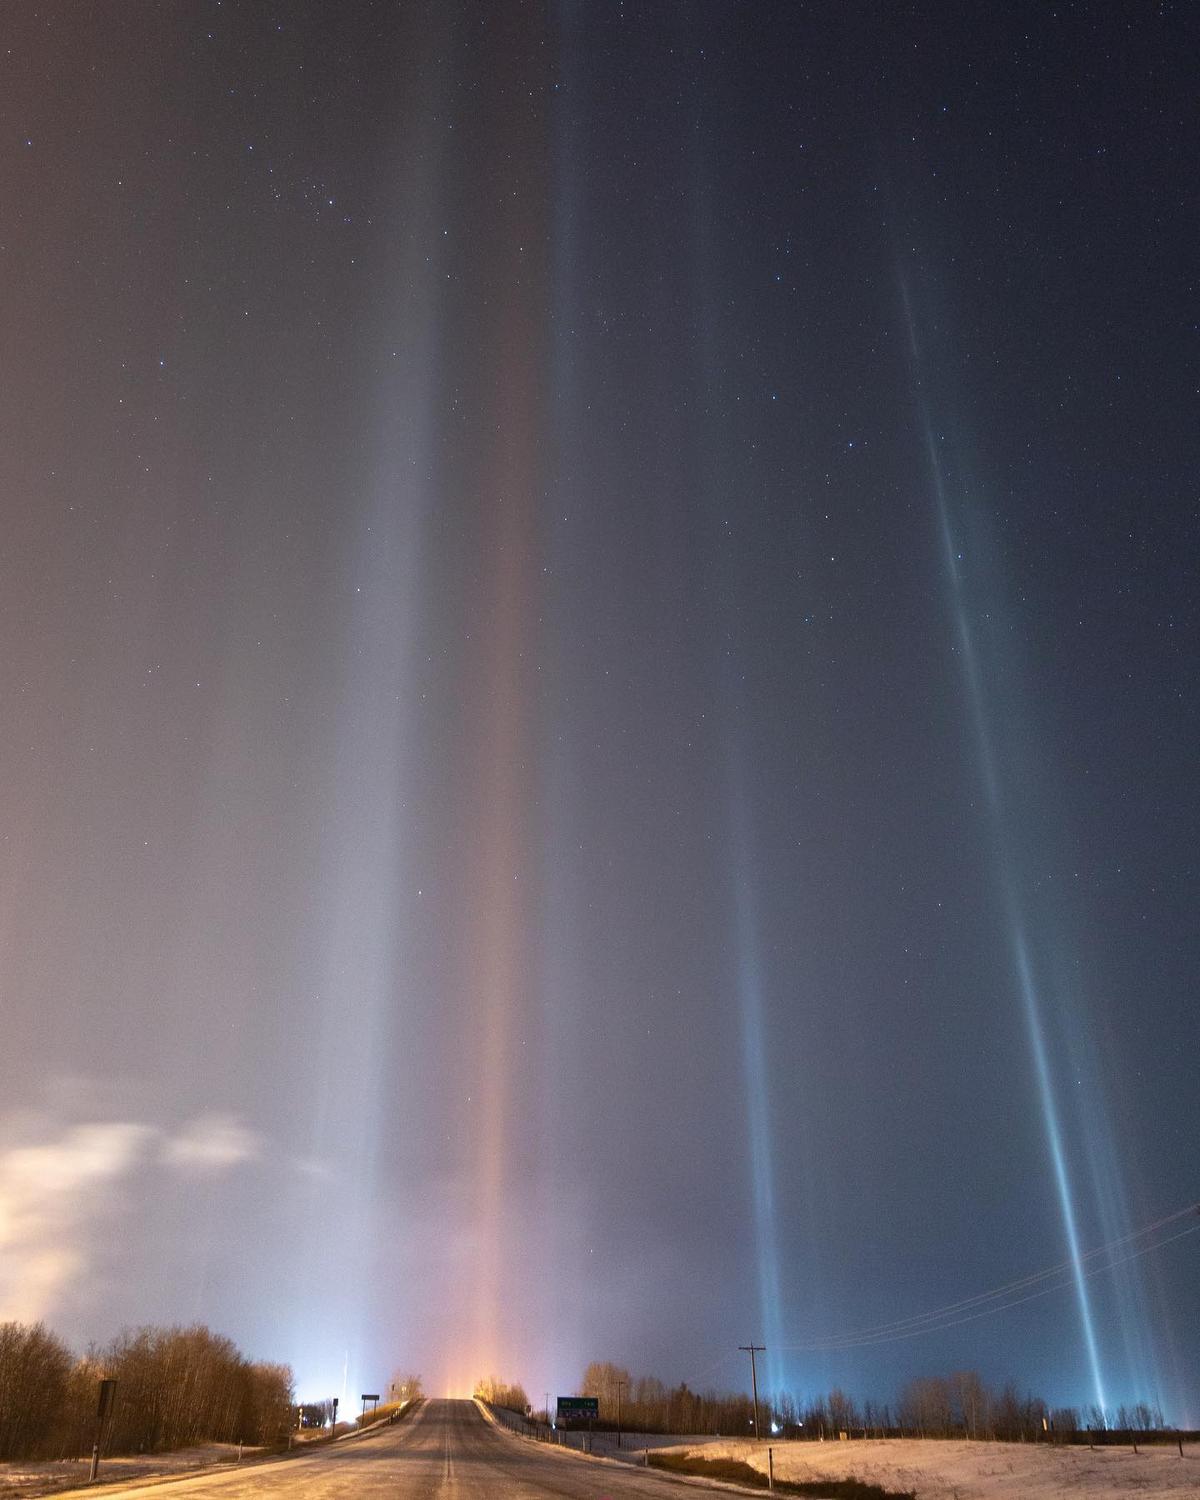 Light pillars photographed over a country road in Alberta, Canada. (Courtesy of <a href="https://www.instagram.com/dartanner/">Dar Tanner</a>)